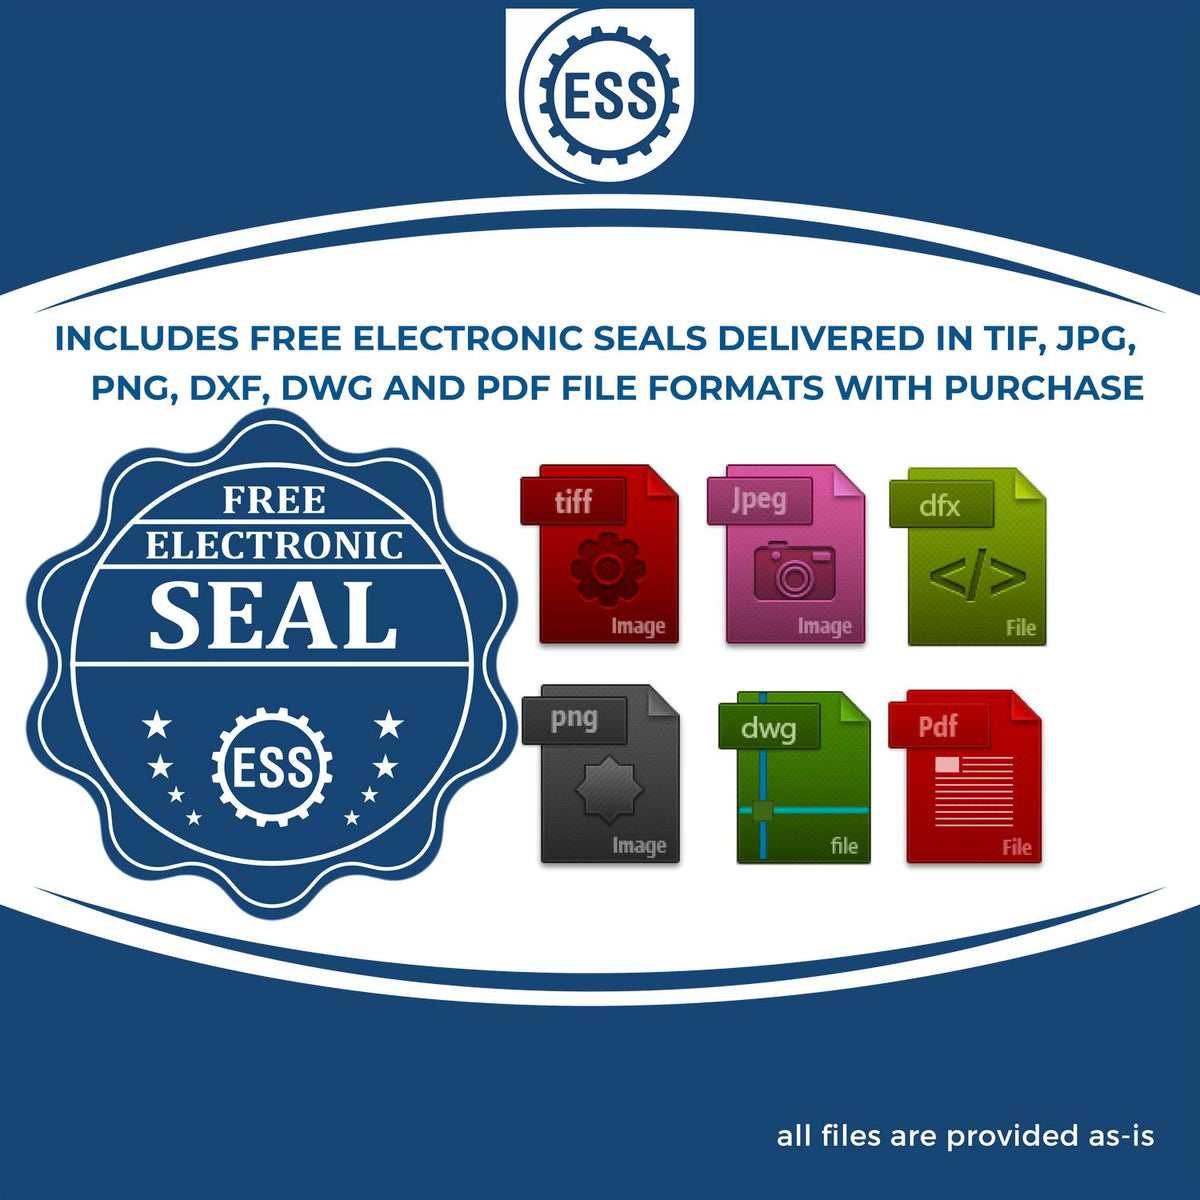 An infographic for the free electronic seal for the Hybrid Illinois Architect Seal illustrating the different file type icons such as DXF, DWG, TIF, JPG and PNG.